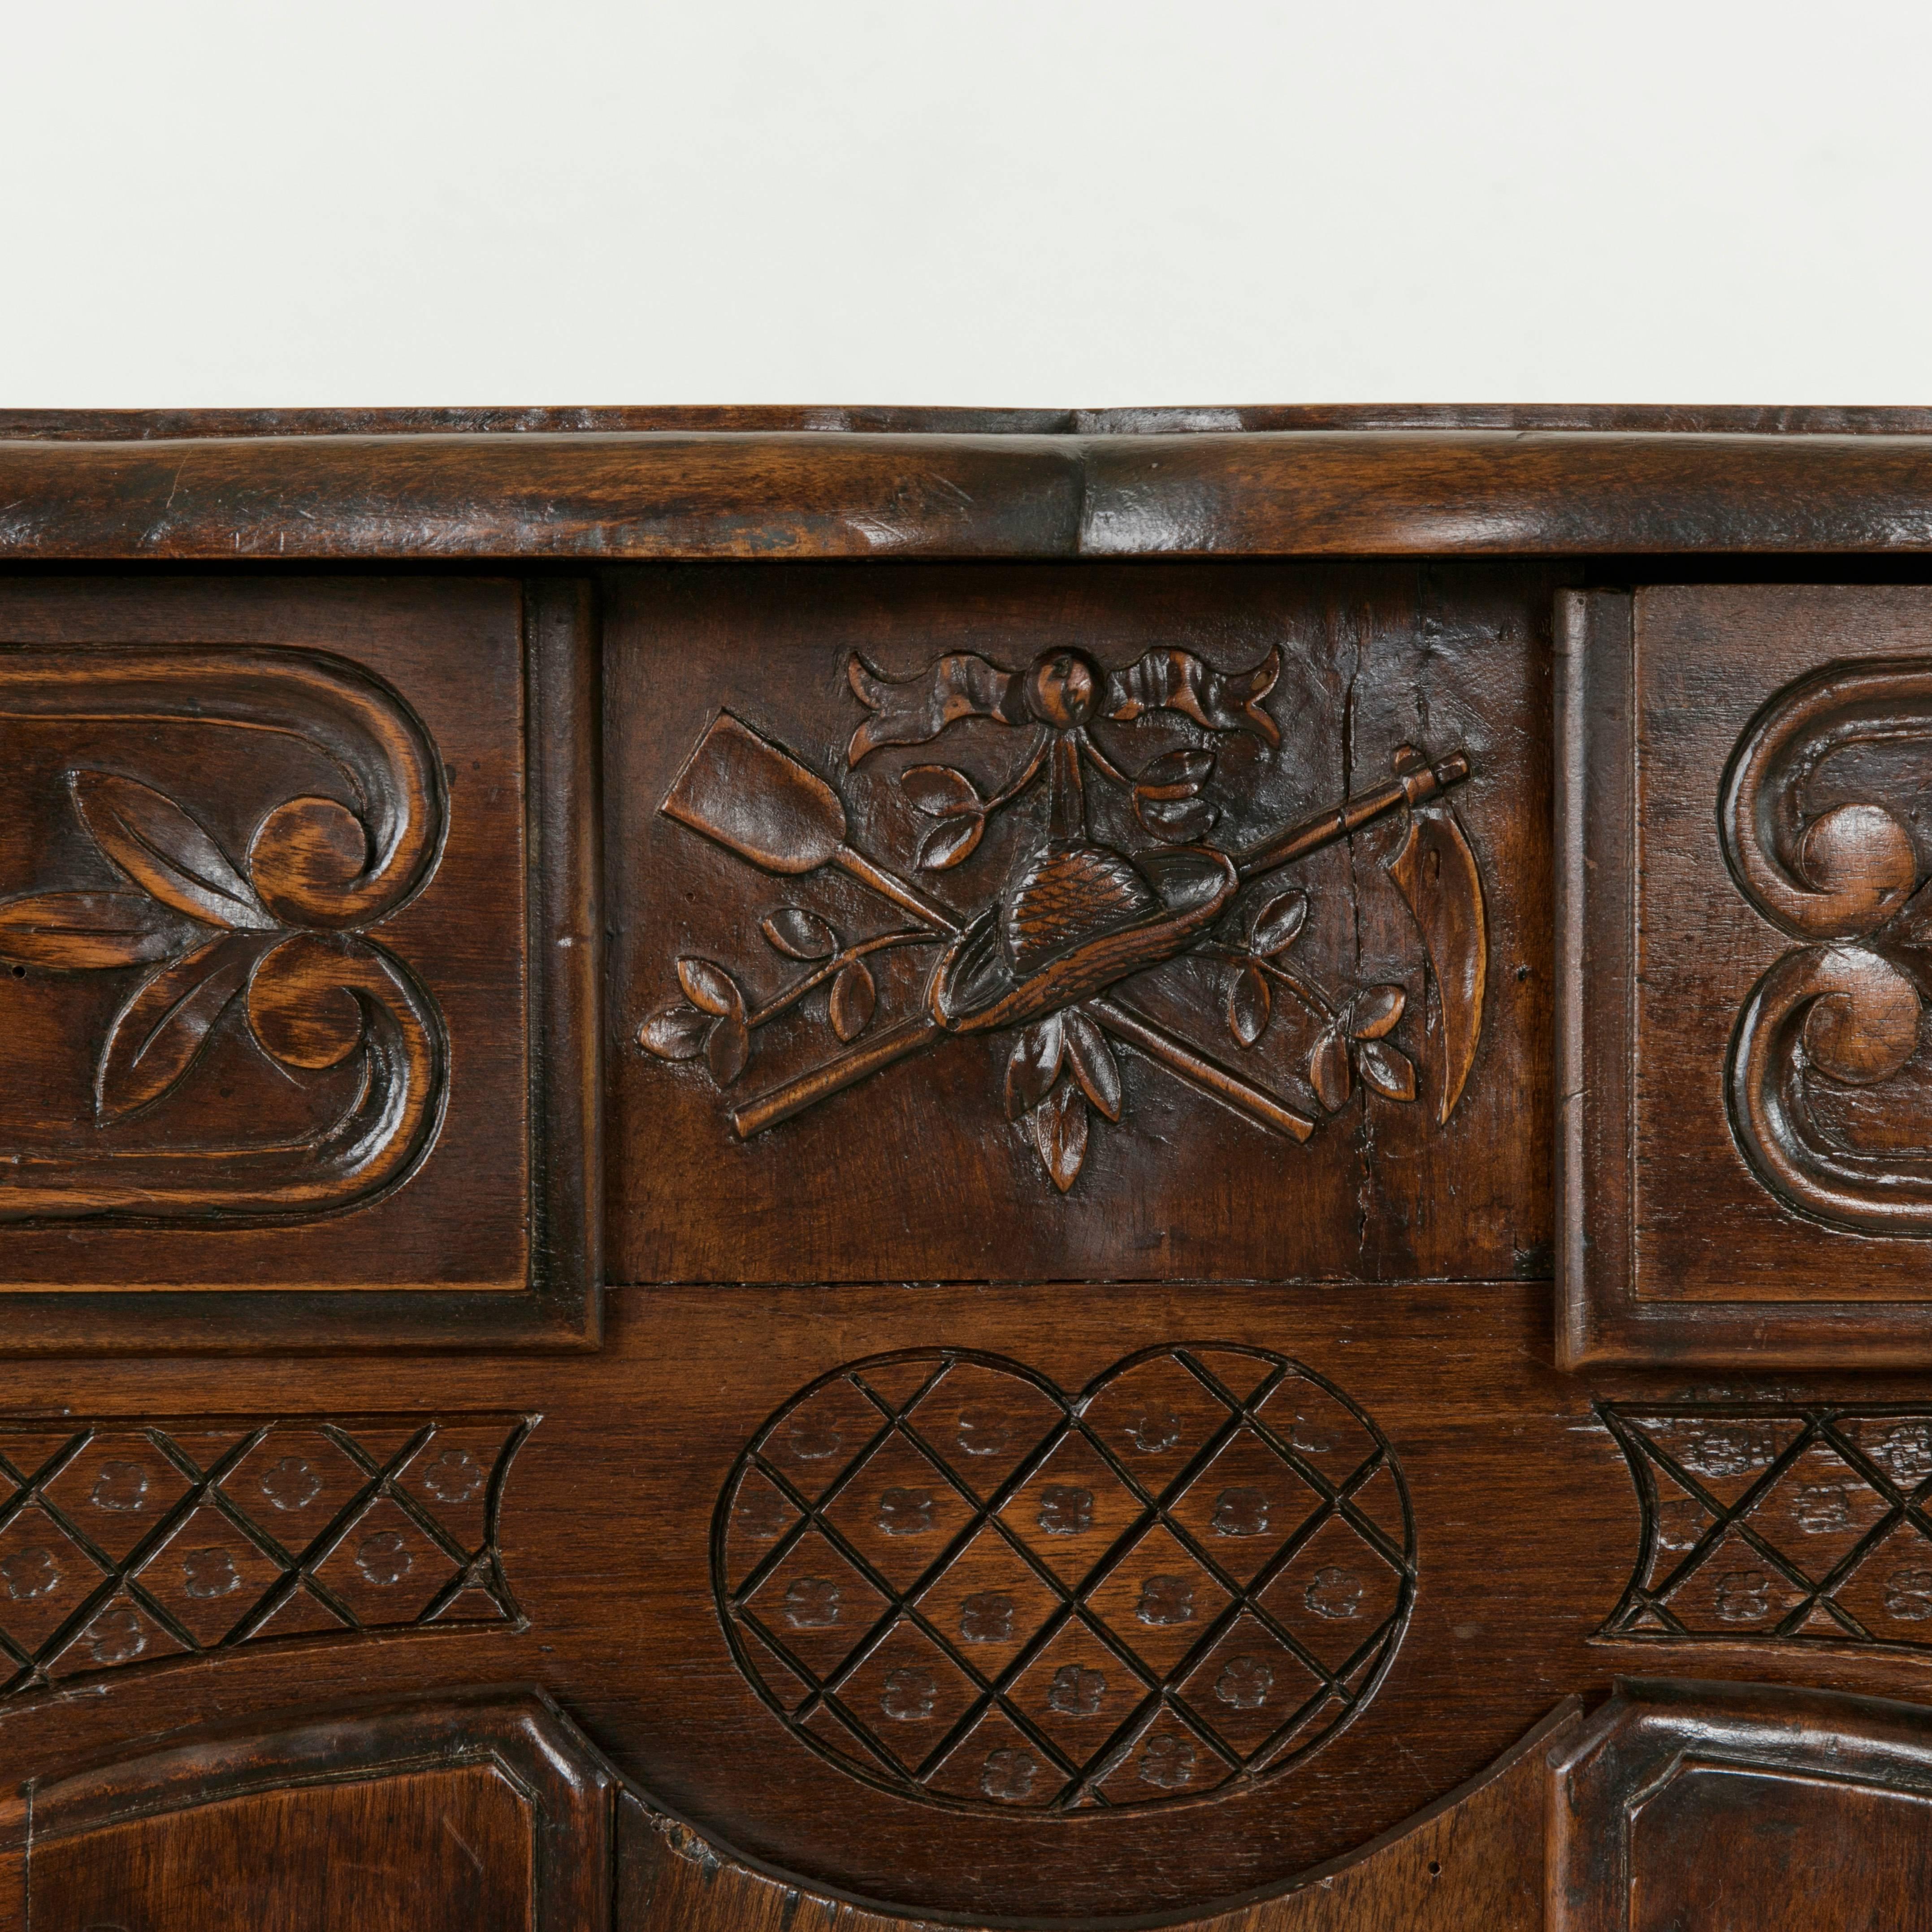 This late 19th century French walnut buffet boasts beautiful hand carvings of garden attributes that include a shovel, scythe, and garden hat, a salute to Provence, the region of its origin in France. Additional carvings of flowers and vines adorn